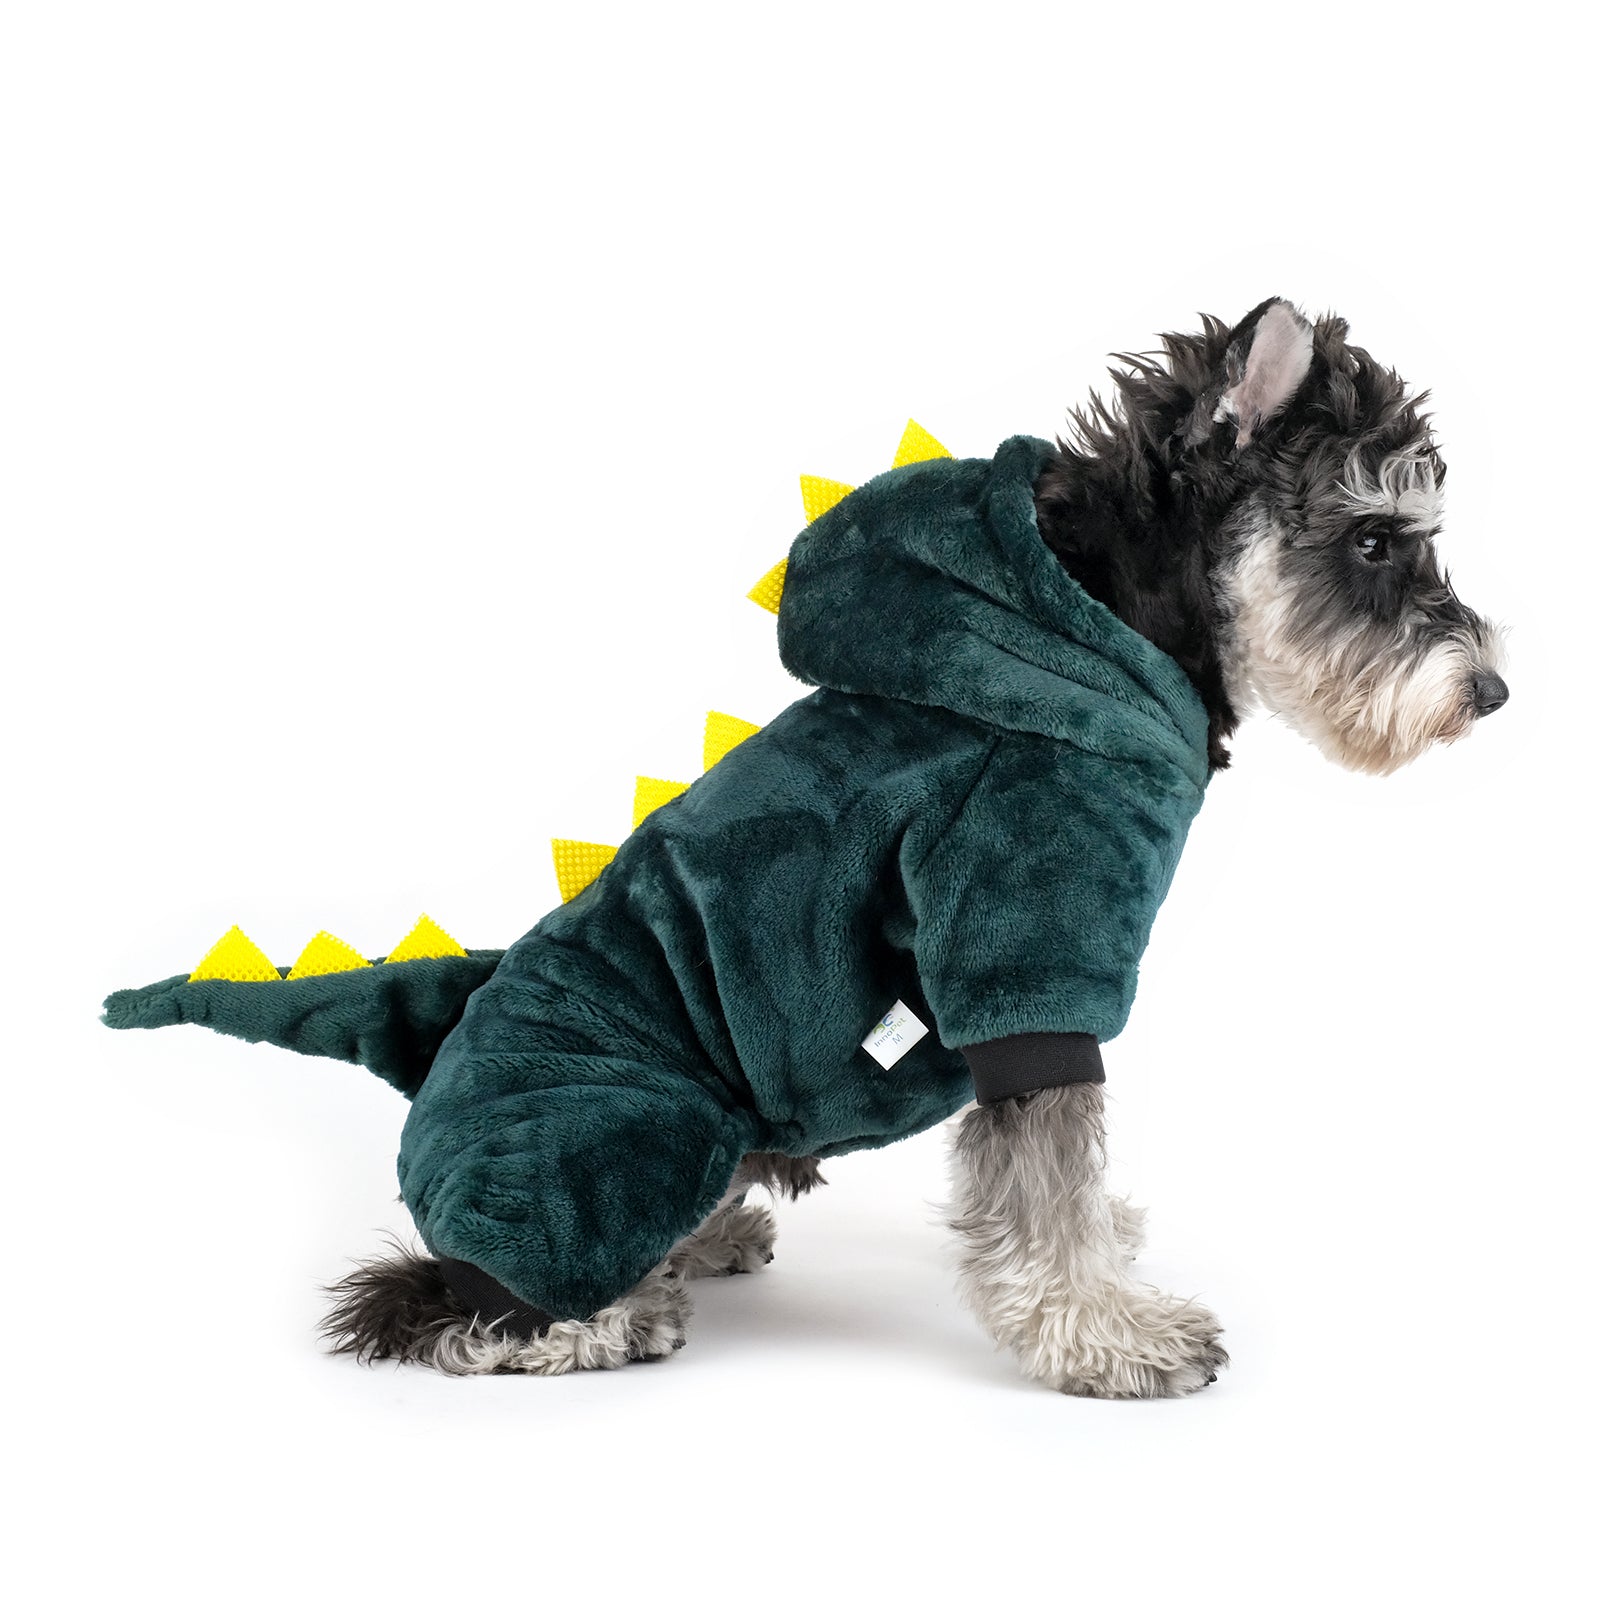 Innopet Dinosaur Pet Costume - For Dogs and Cats - Perfect for Halloween, Christmas, Cosplay and Fancy Dress Parties